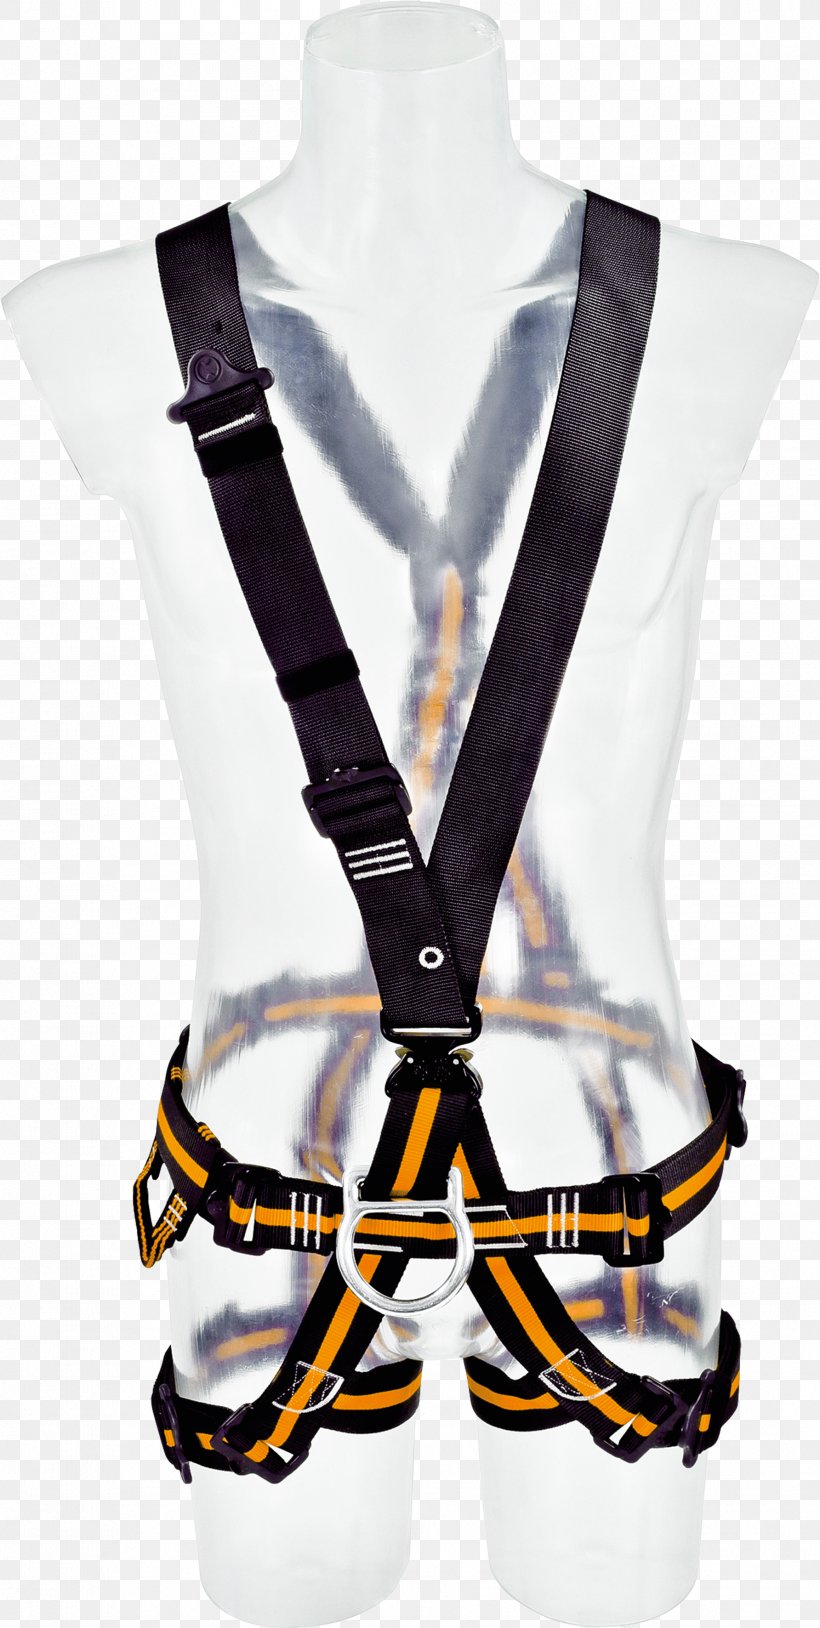 Climbing Harnesses SKYLOTEC Safety Harness Climbing Protection, PNG, 1784x3543px, Climbing Harnesses, Adventure Park, Climbing, Climbing Harness, Climbing Protection Download Free